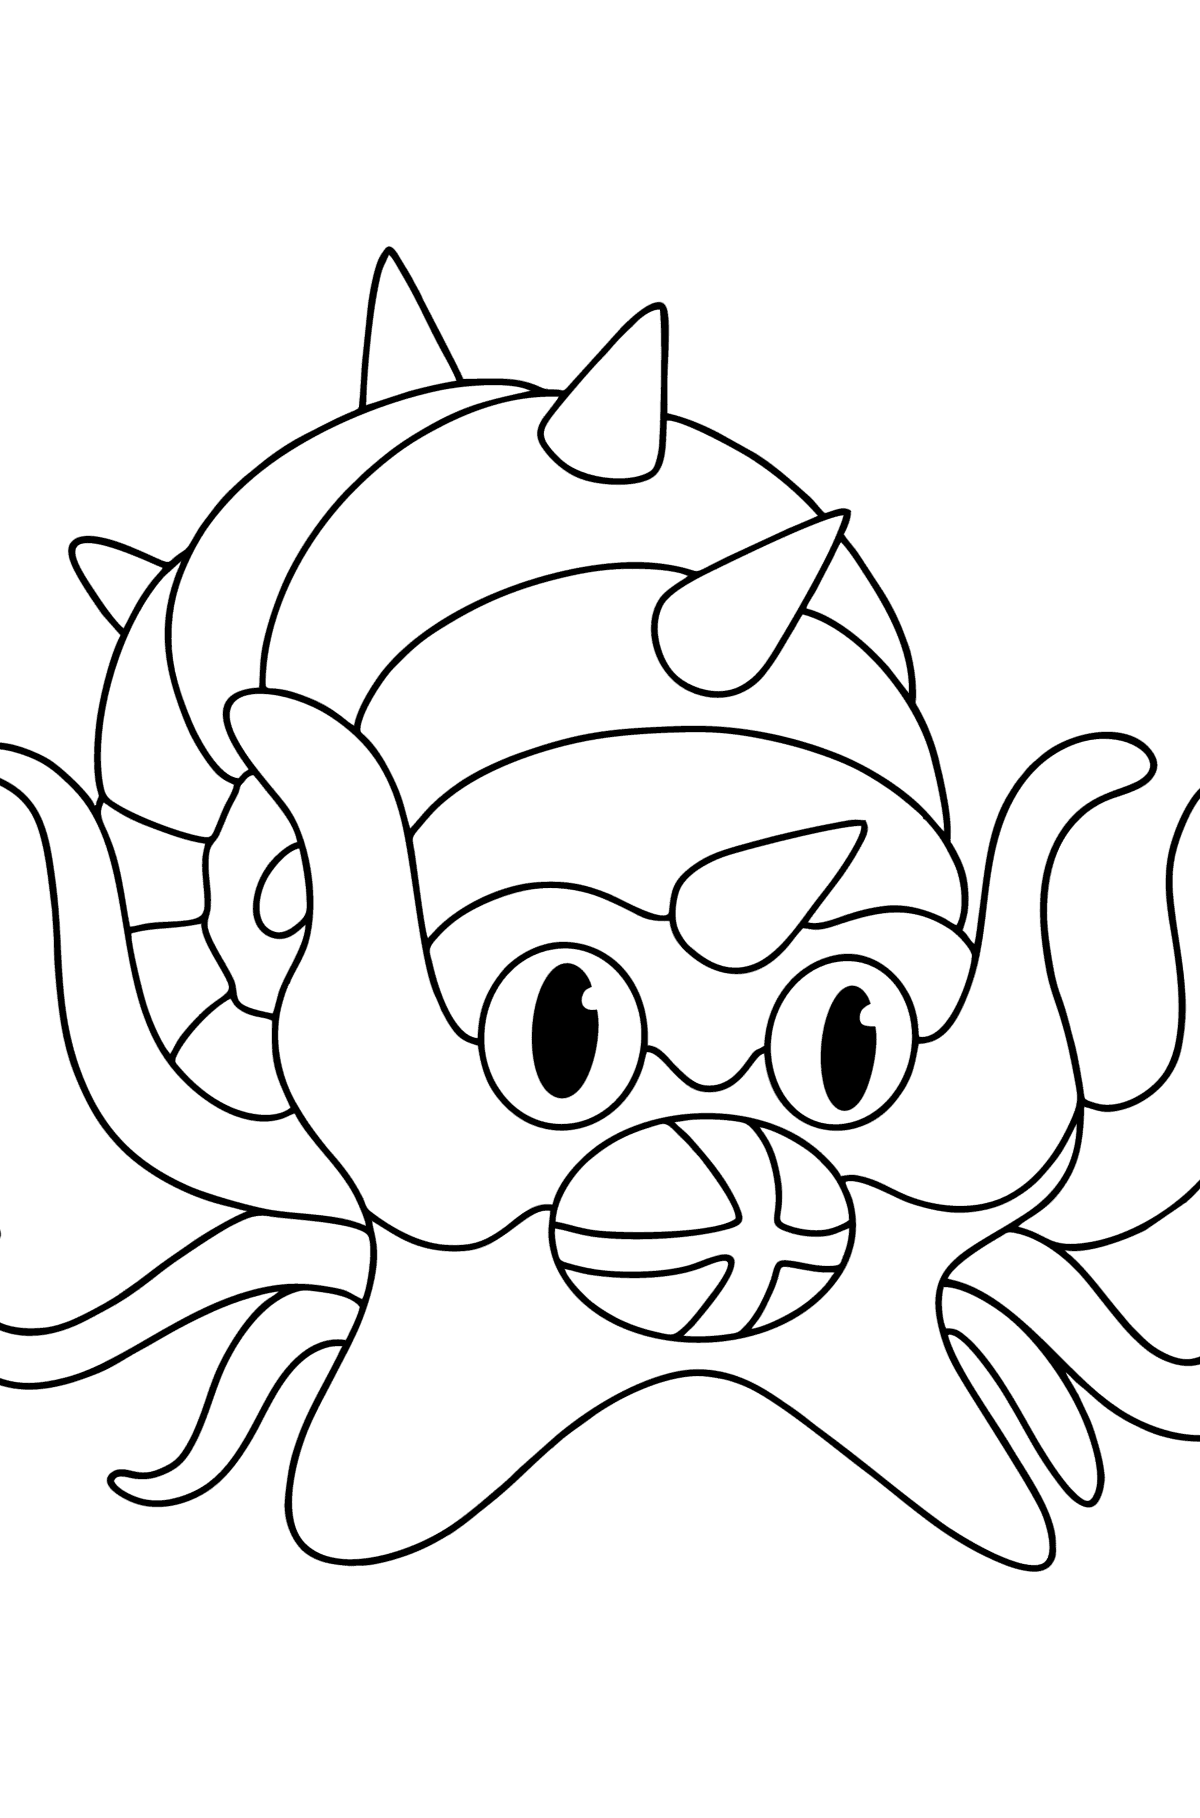 Colouring page Pokémon X and Y Omastar - Coloring Pages for Kids